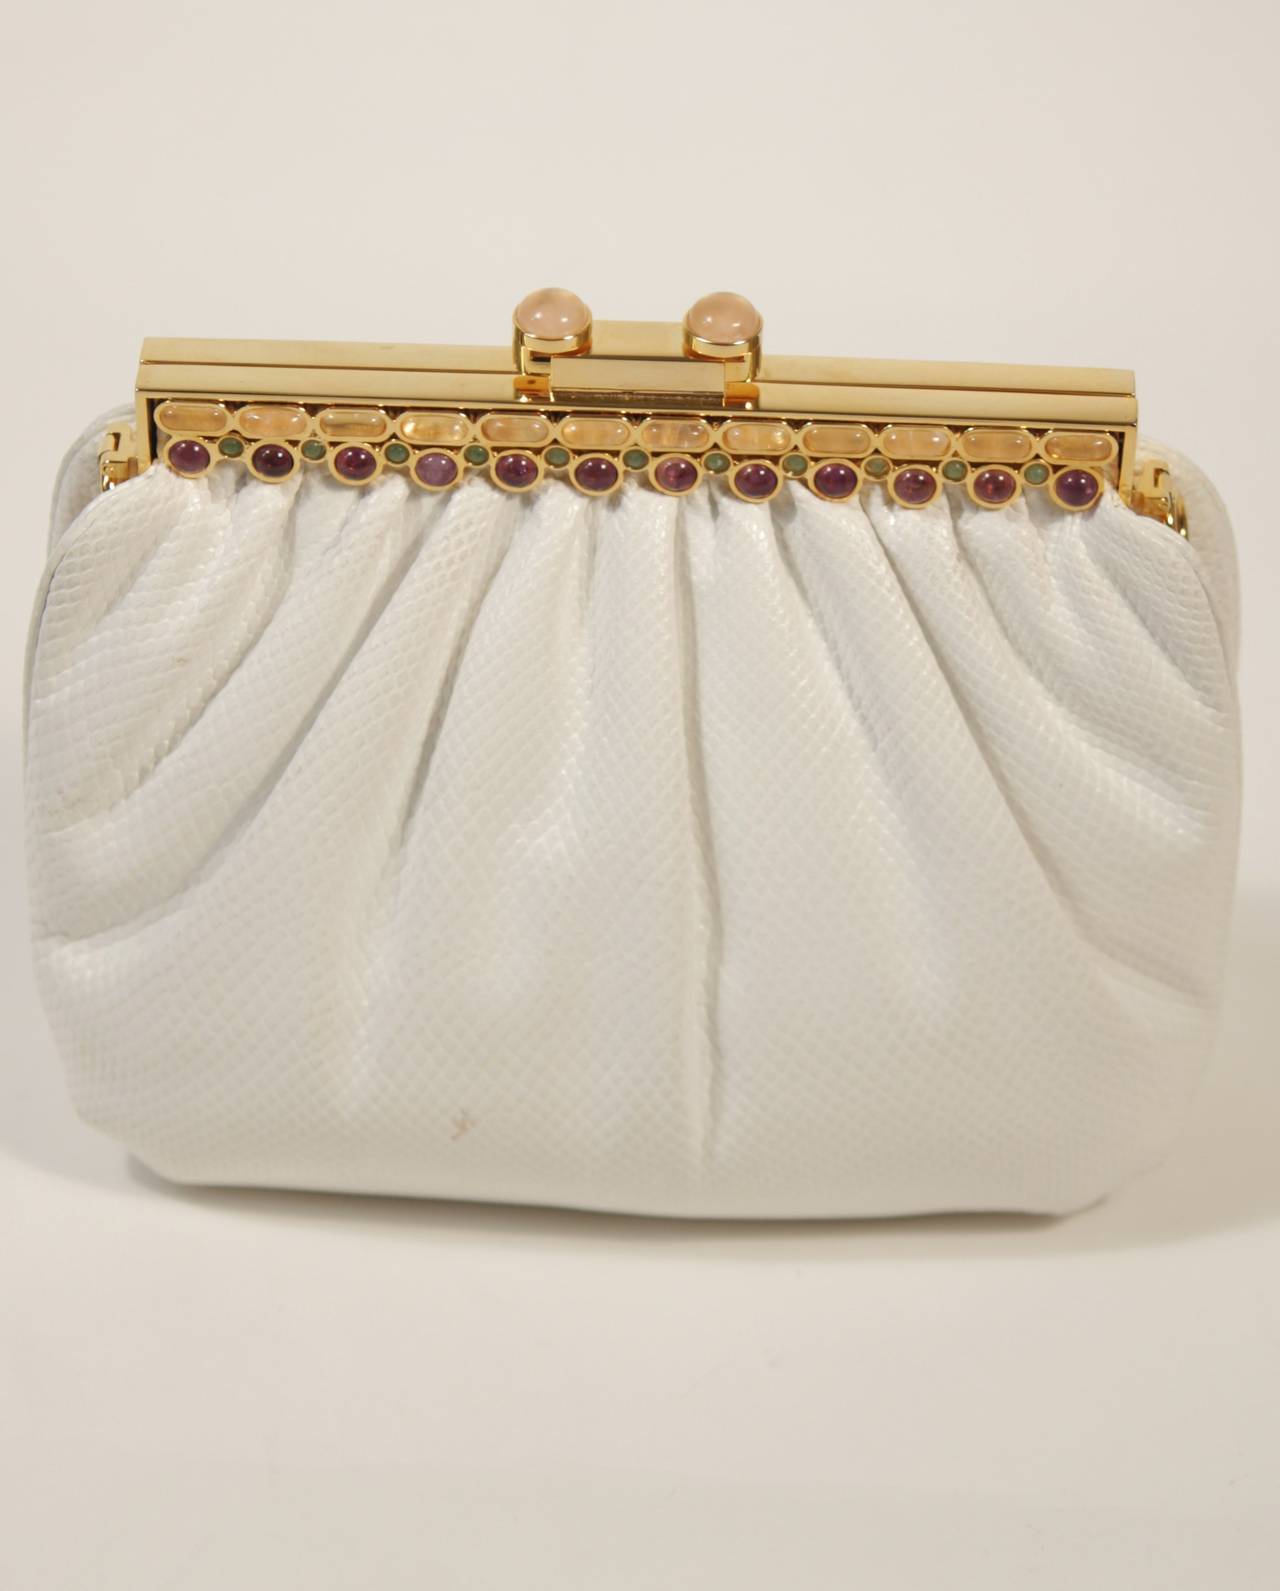 This vintage Judith Leiber is available for viewing at our Beverly Hills Boutique. We offer a large selection of evening gowns and luxury garments.

This handbag is composed of gathered white lizard. The gold metal frame is adorned with